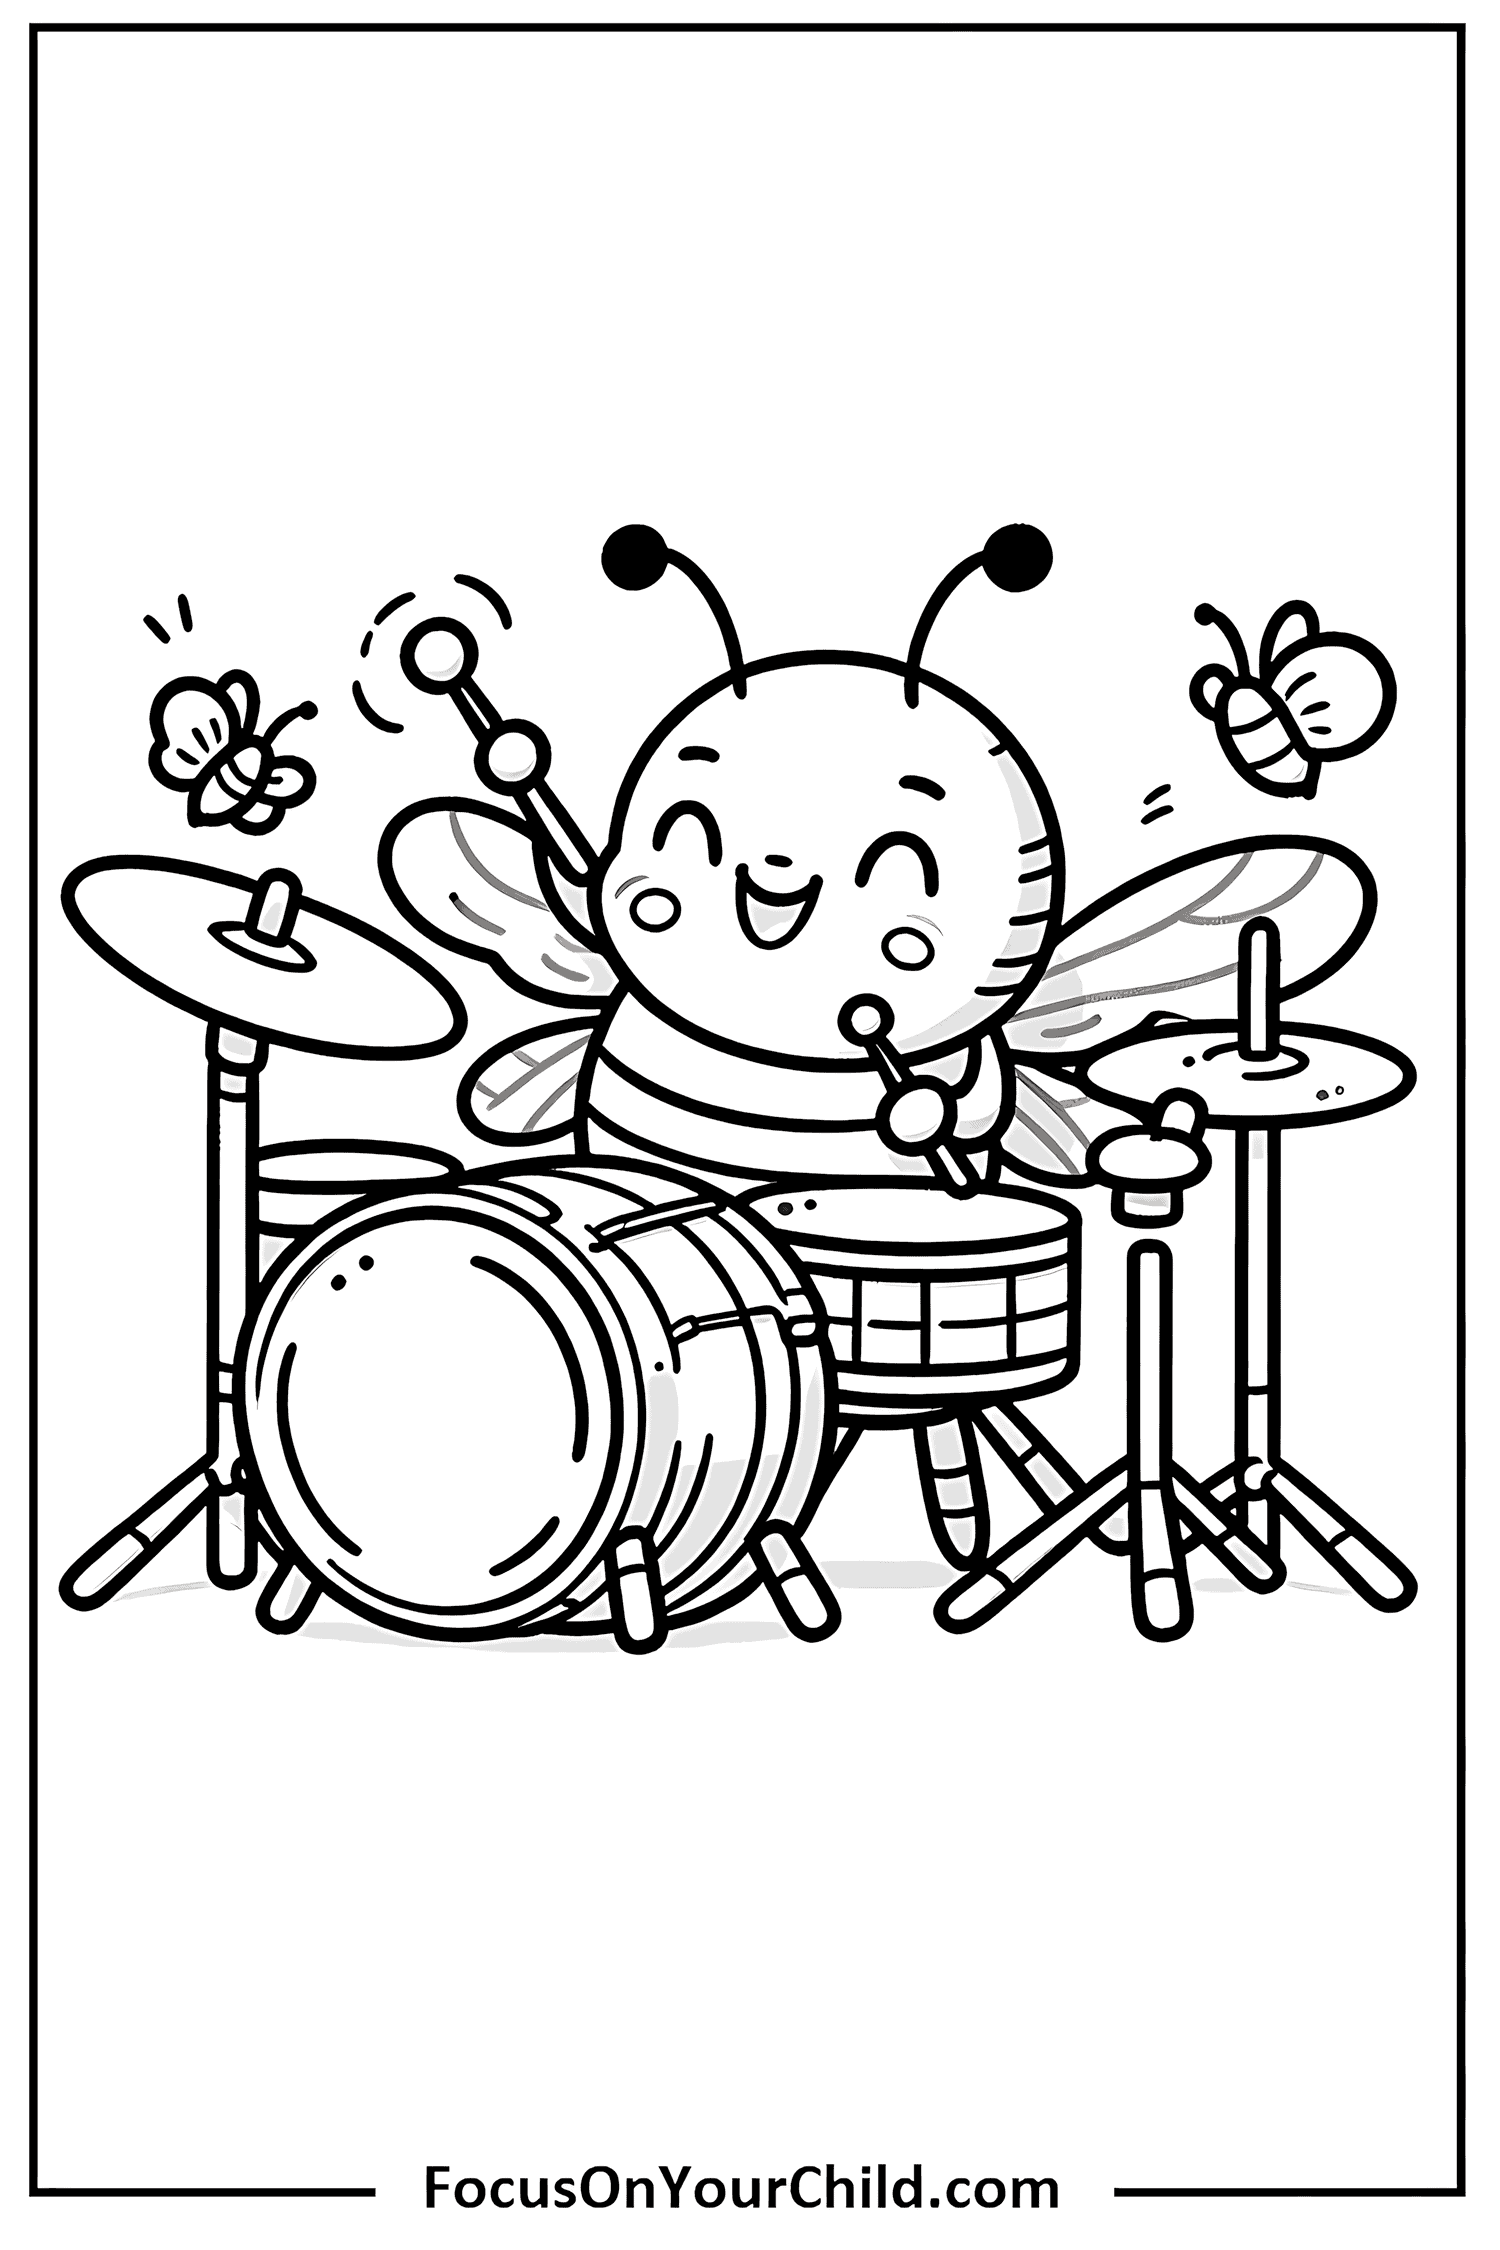 Cheerful bee playing drum set in black and white line drawing.